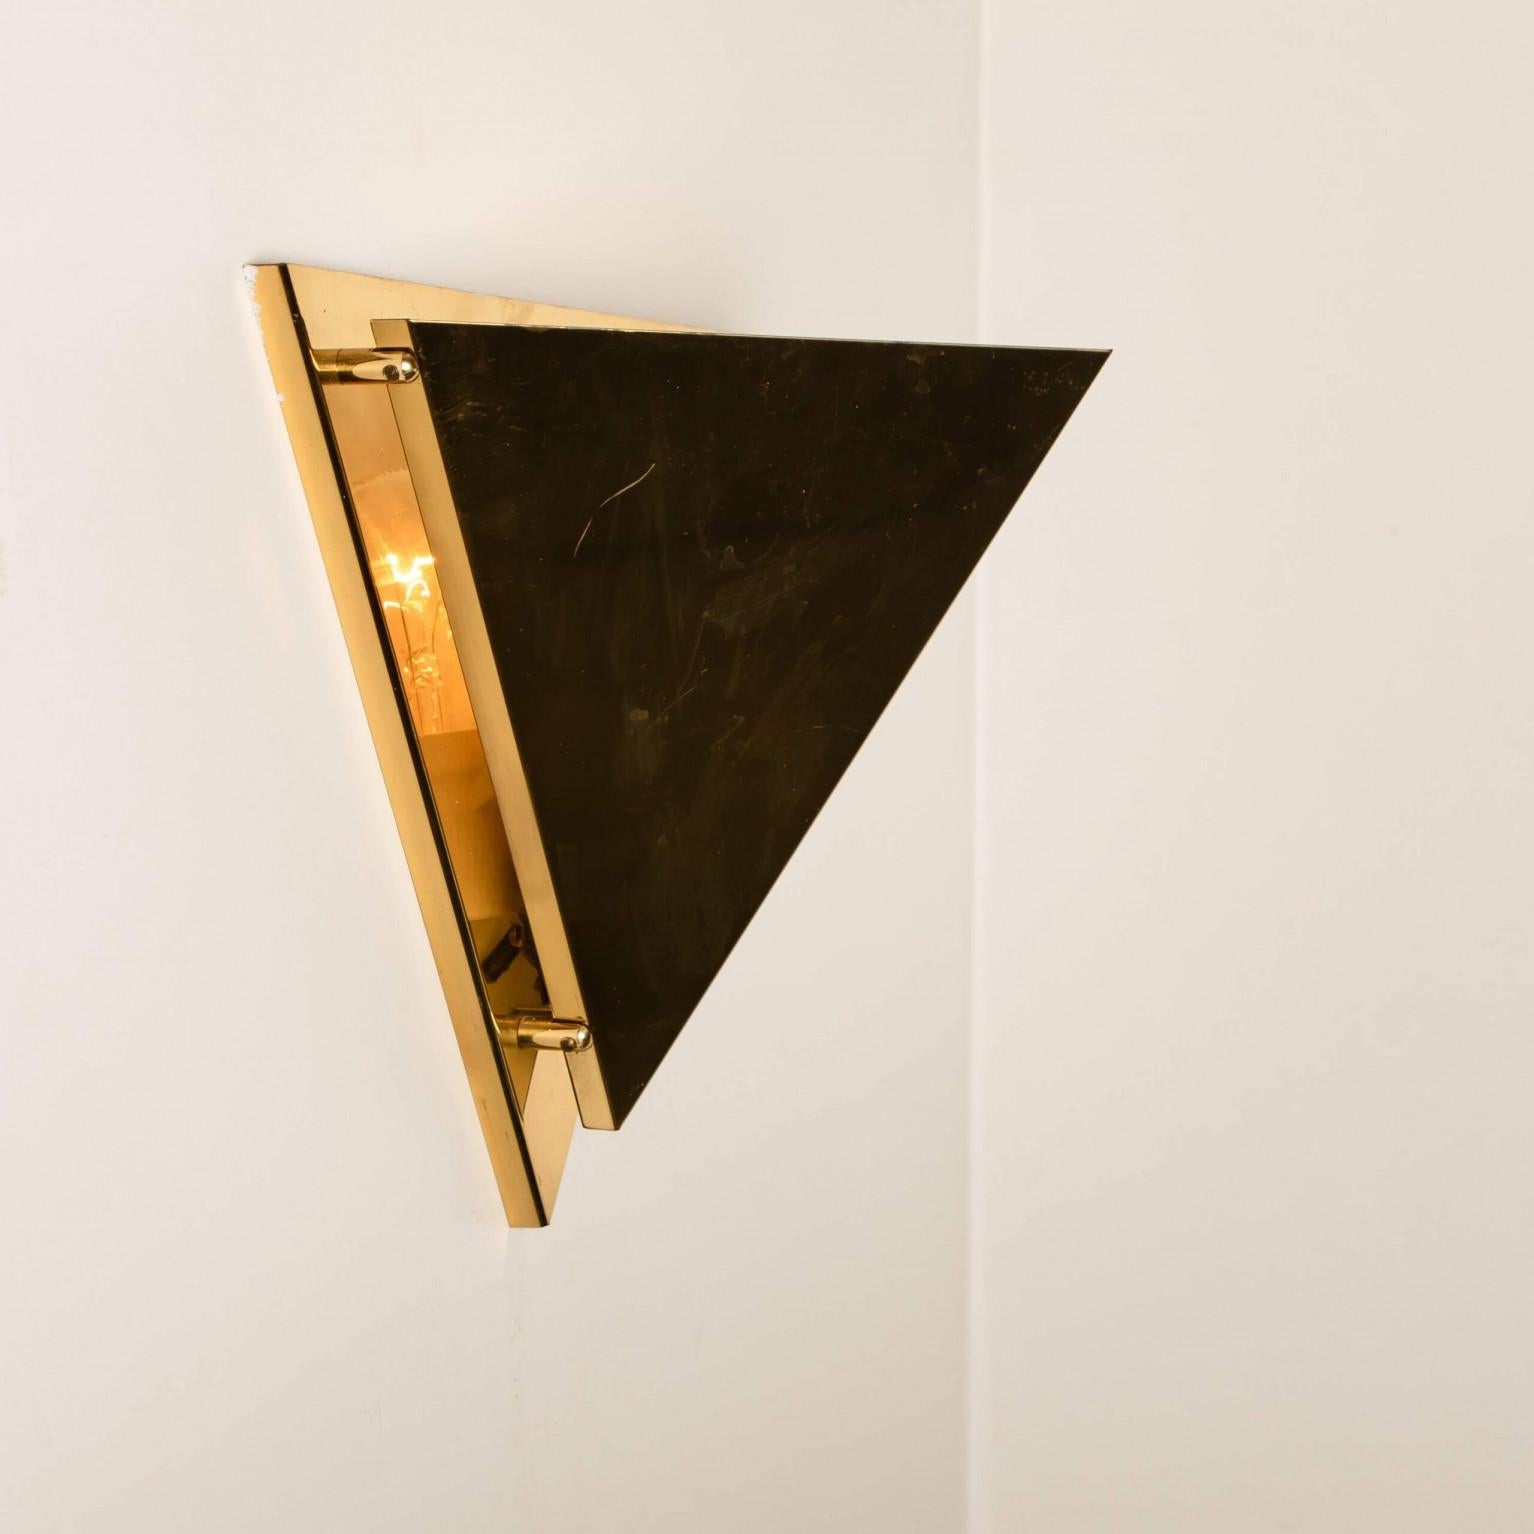 1 of the 5 Pyramid Shaped Massive Brass Wall Lamps, 1970s For Sale 3